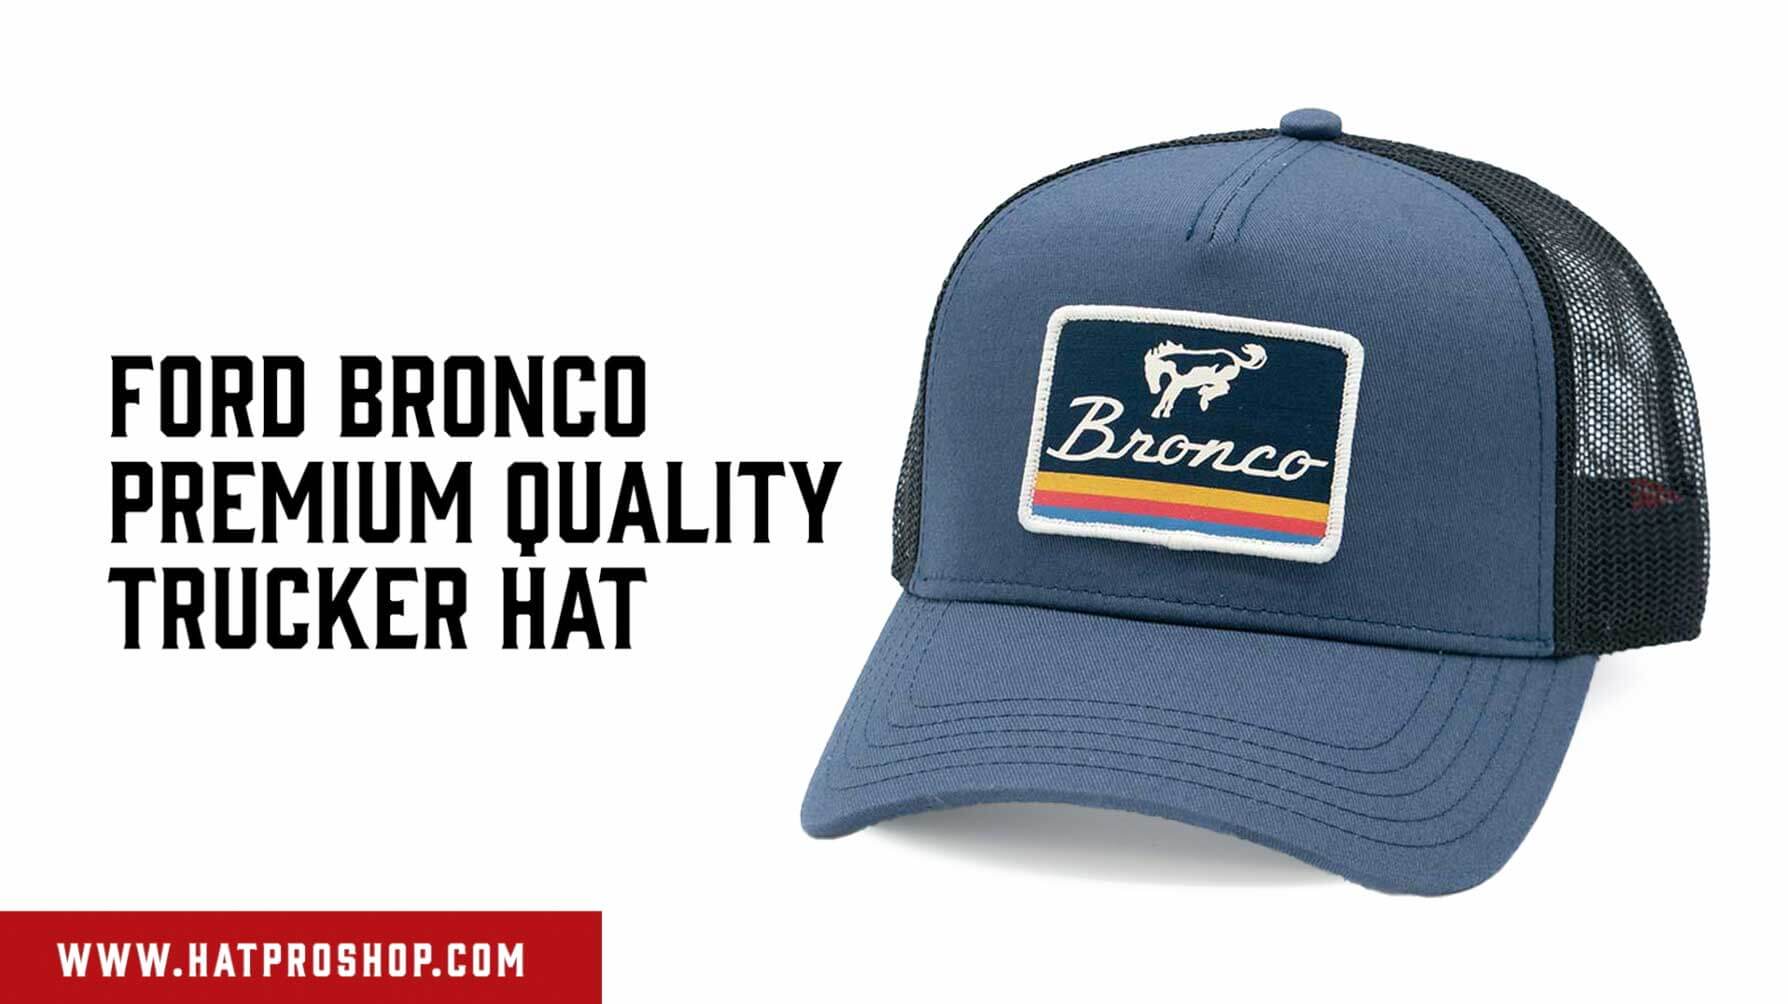 Load video: Showcasing high quality Ford Bronco Trucker Hats you can buy from Hat Pro Shop.